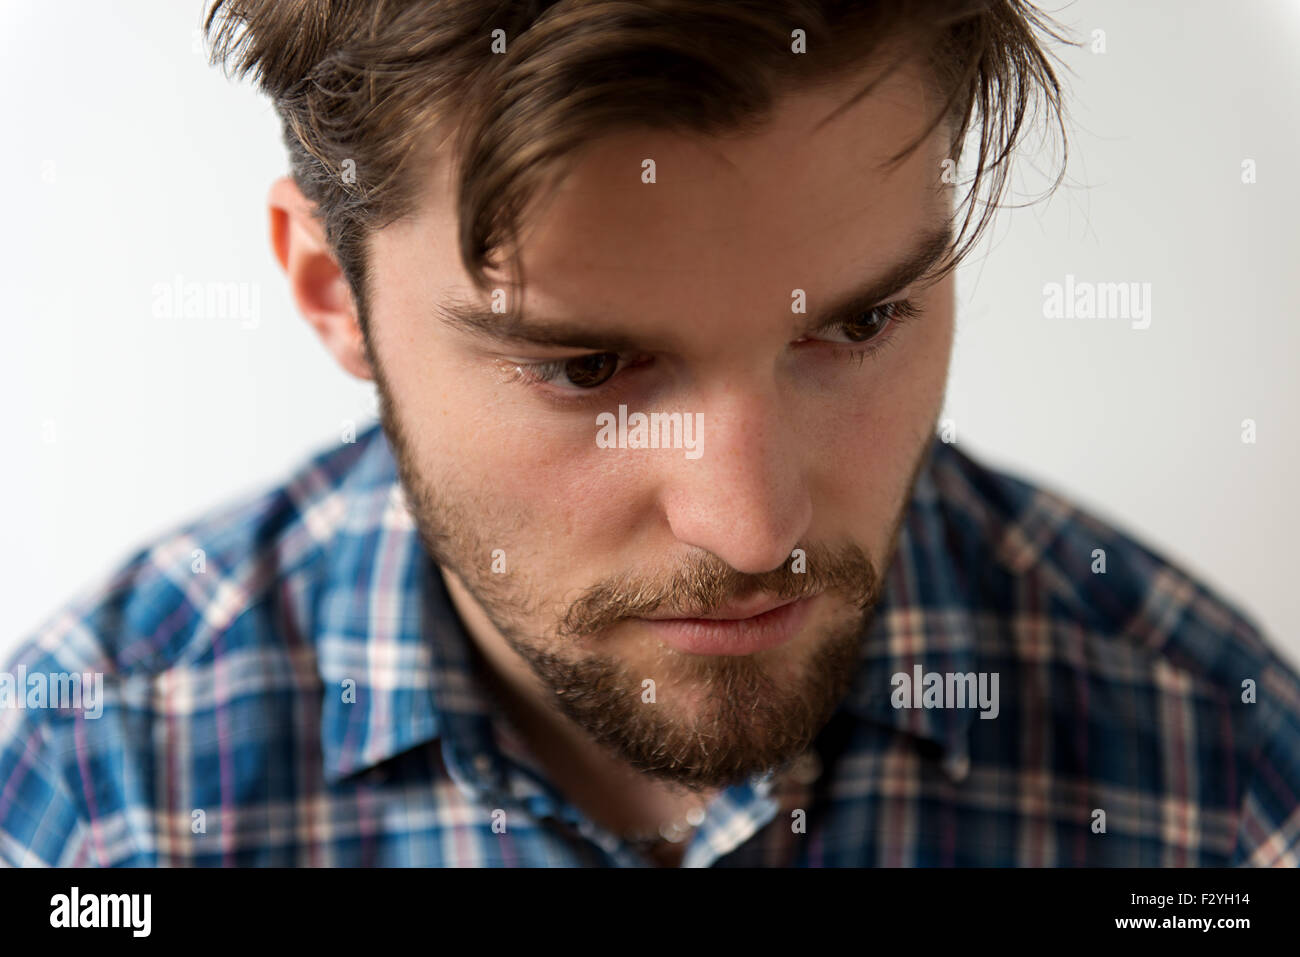 Hes One Chiseled Dude Handsome Young Stock Photo 2137904939